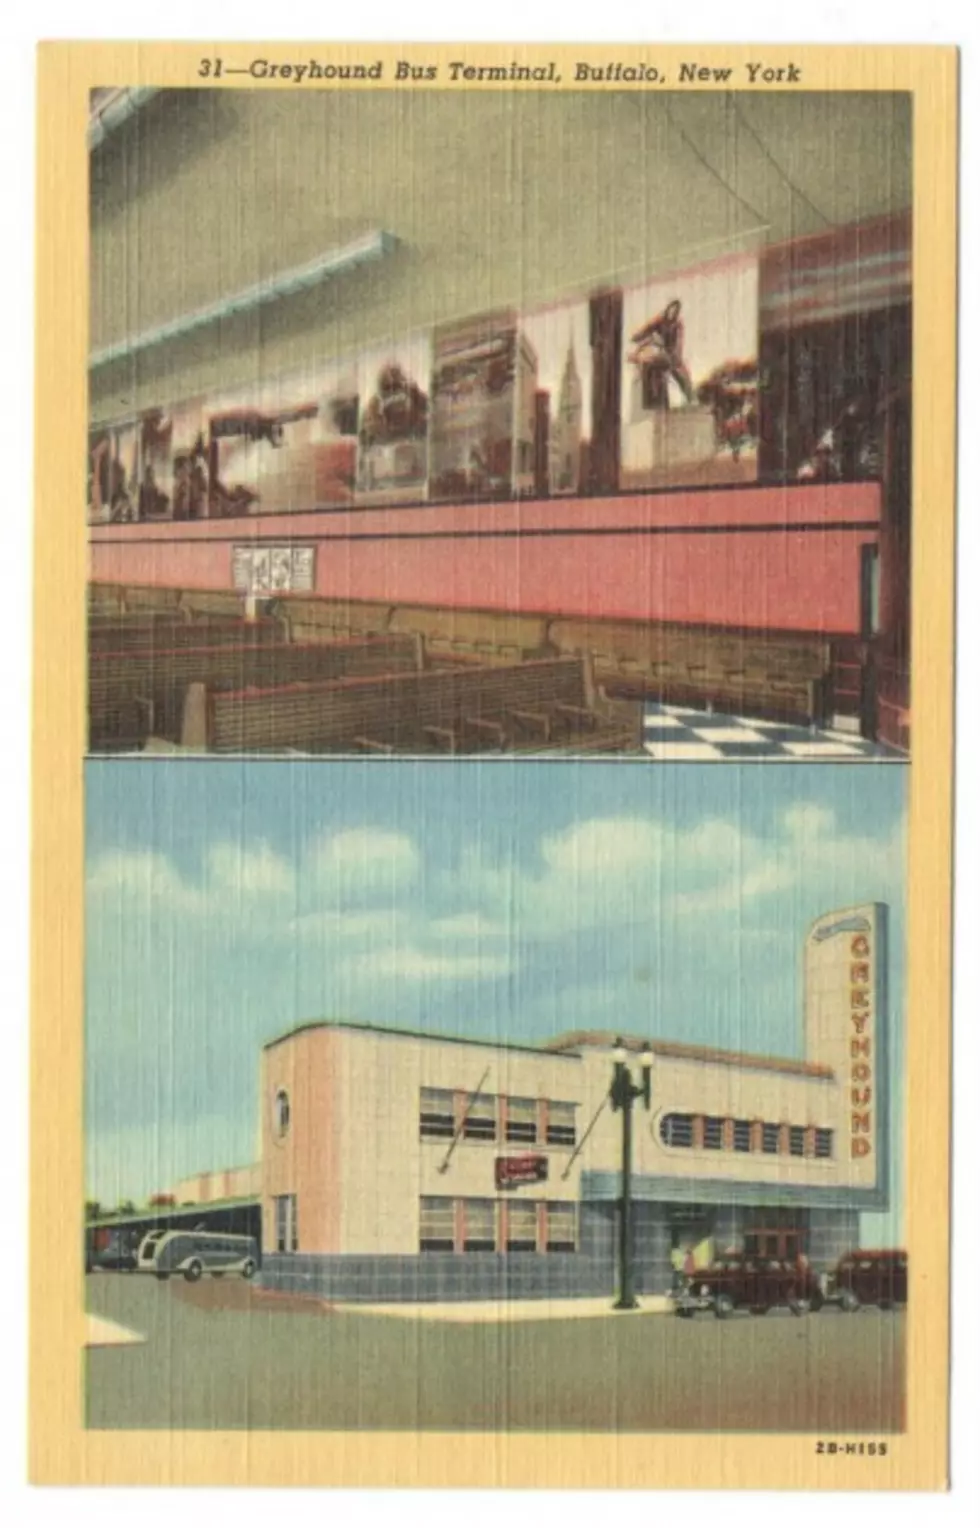 Buffalo&#8217;s Old Greyhound Bus Terminal &#8212; An Example of Awesome Building Re-use [BUFFALO: THEN AND NOW]